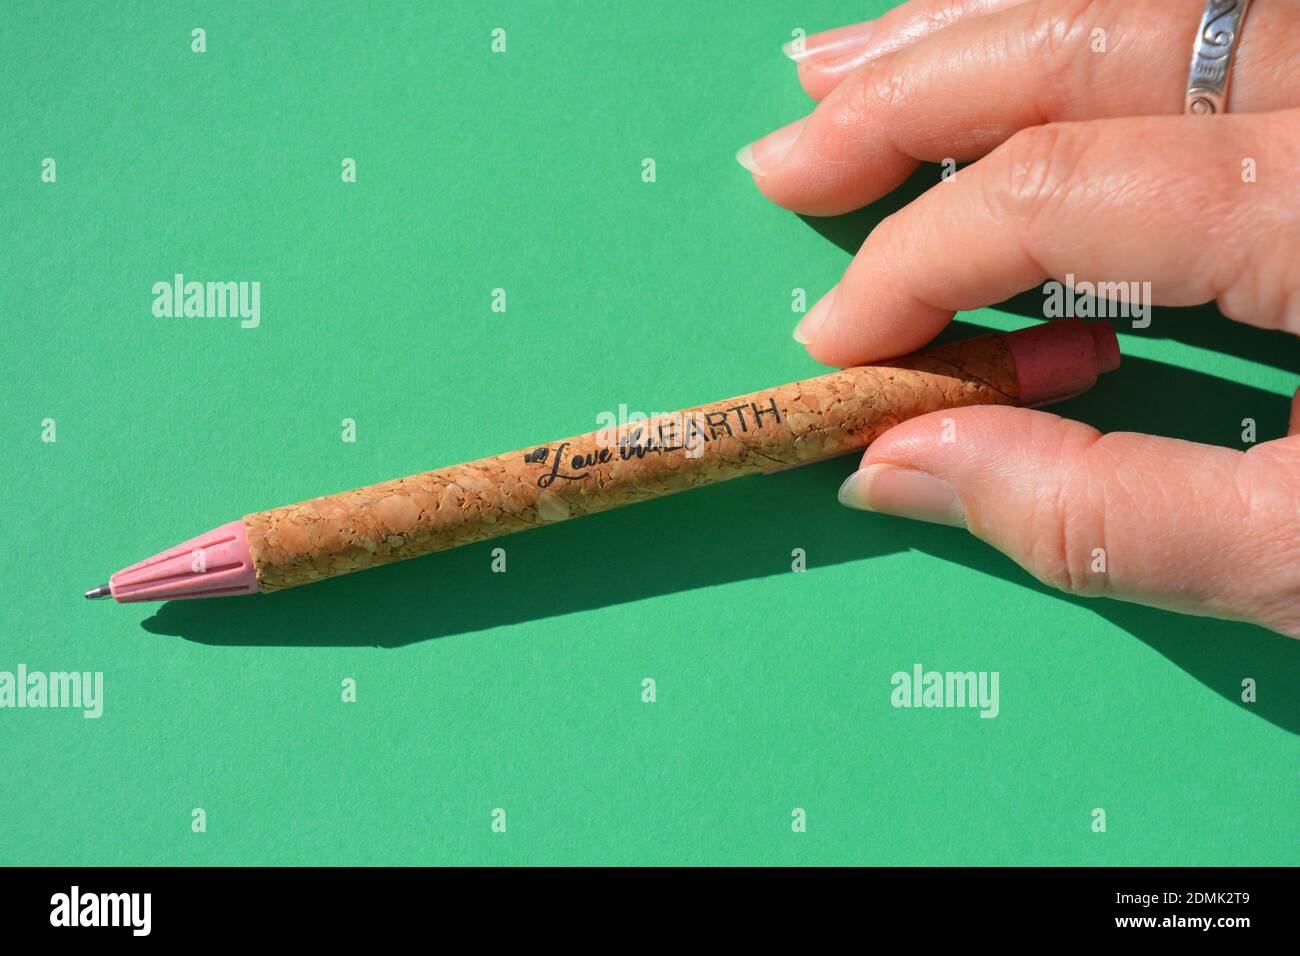 Love The Earth. Slogan On A Pen Made From Recycled Plastic And Sustainable Natural Cork. Pen In Hand Stock Photo